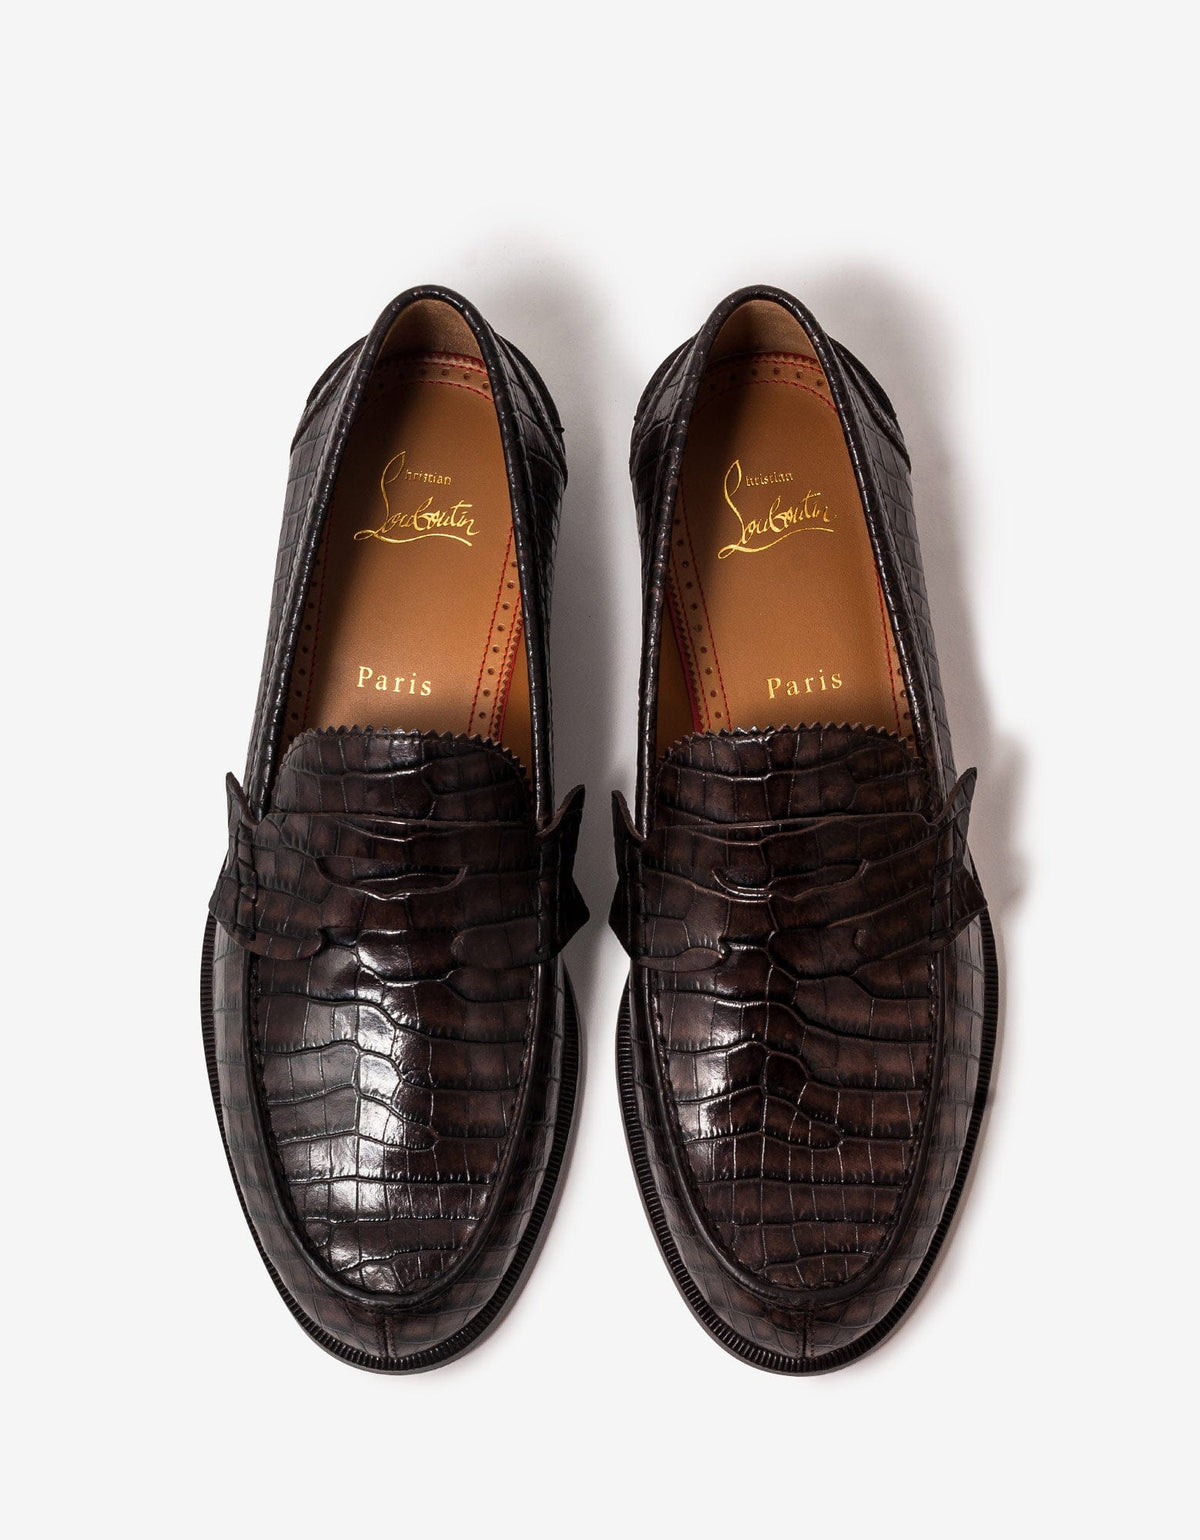 Christian Louboutin No Penny Mini-Croc Brown Loafers -